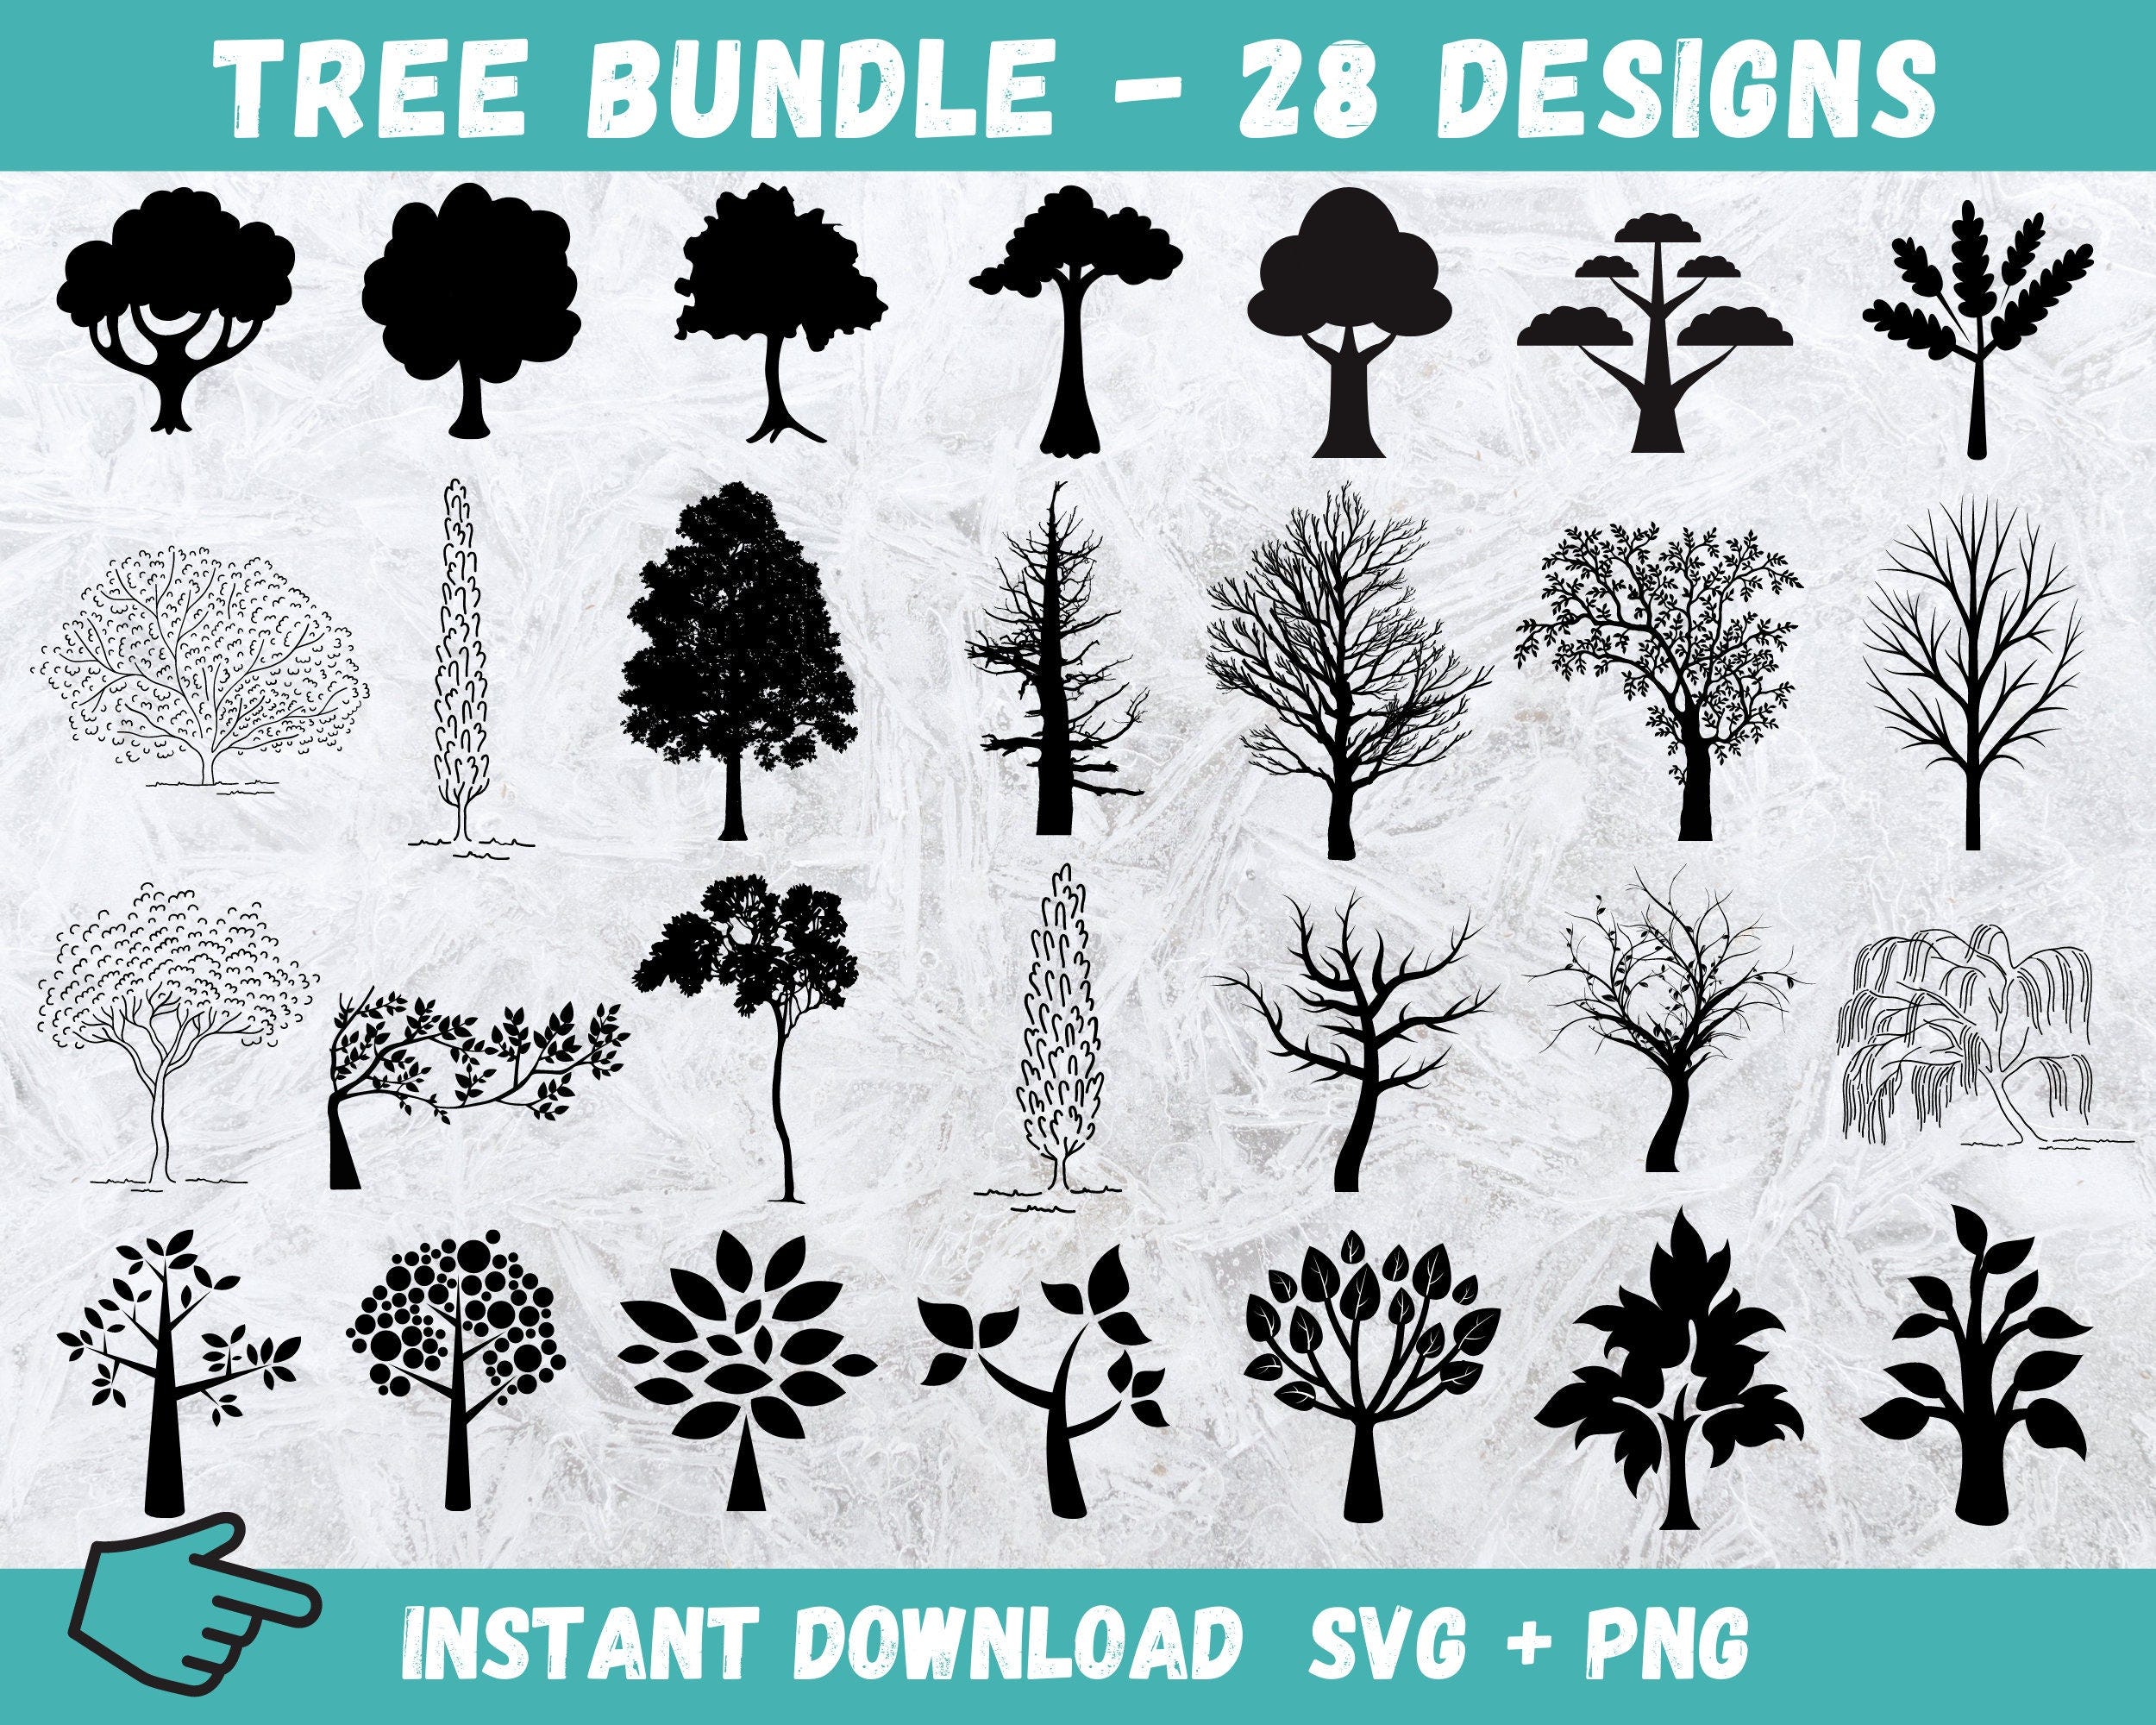 Tree SVG, Forest SVG, Trees svg, Tree Silhouette, SVG Cut Files, Tree Bundle Svg, Tree Clipart, Tree Cut File, Tree Vector, Instant Download